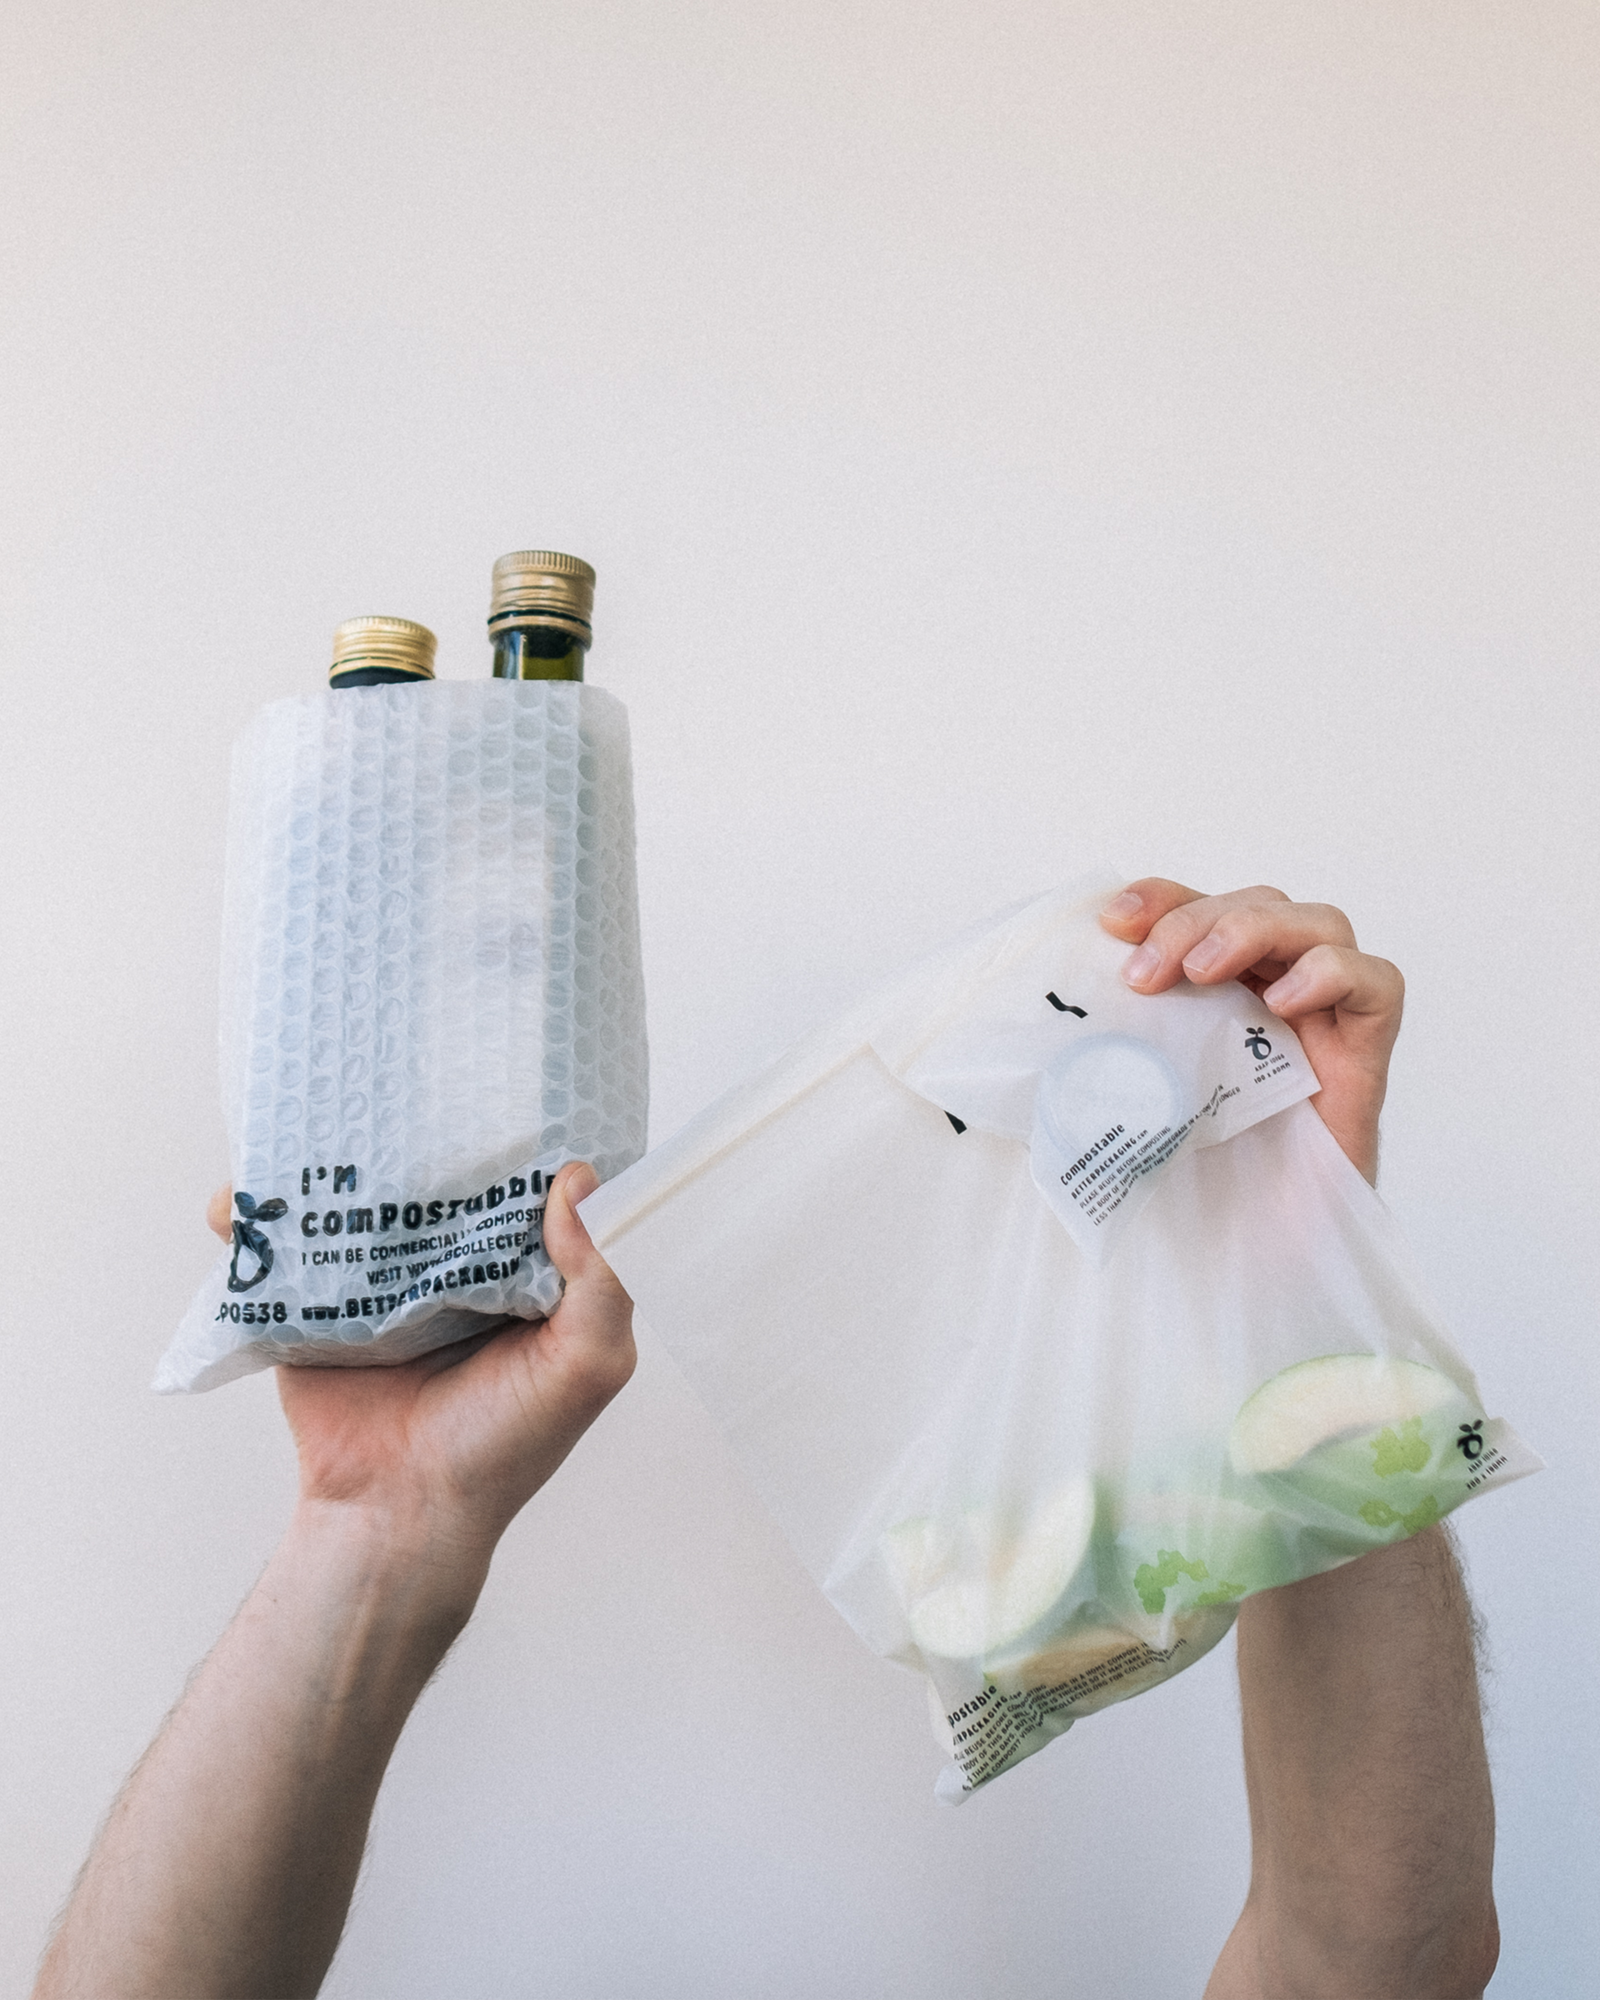 Compostable Poly Bags - Better Packaging Co